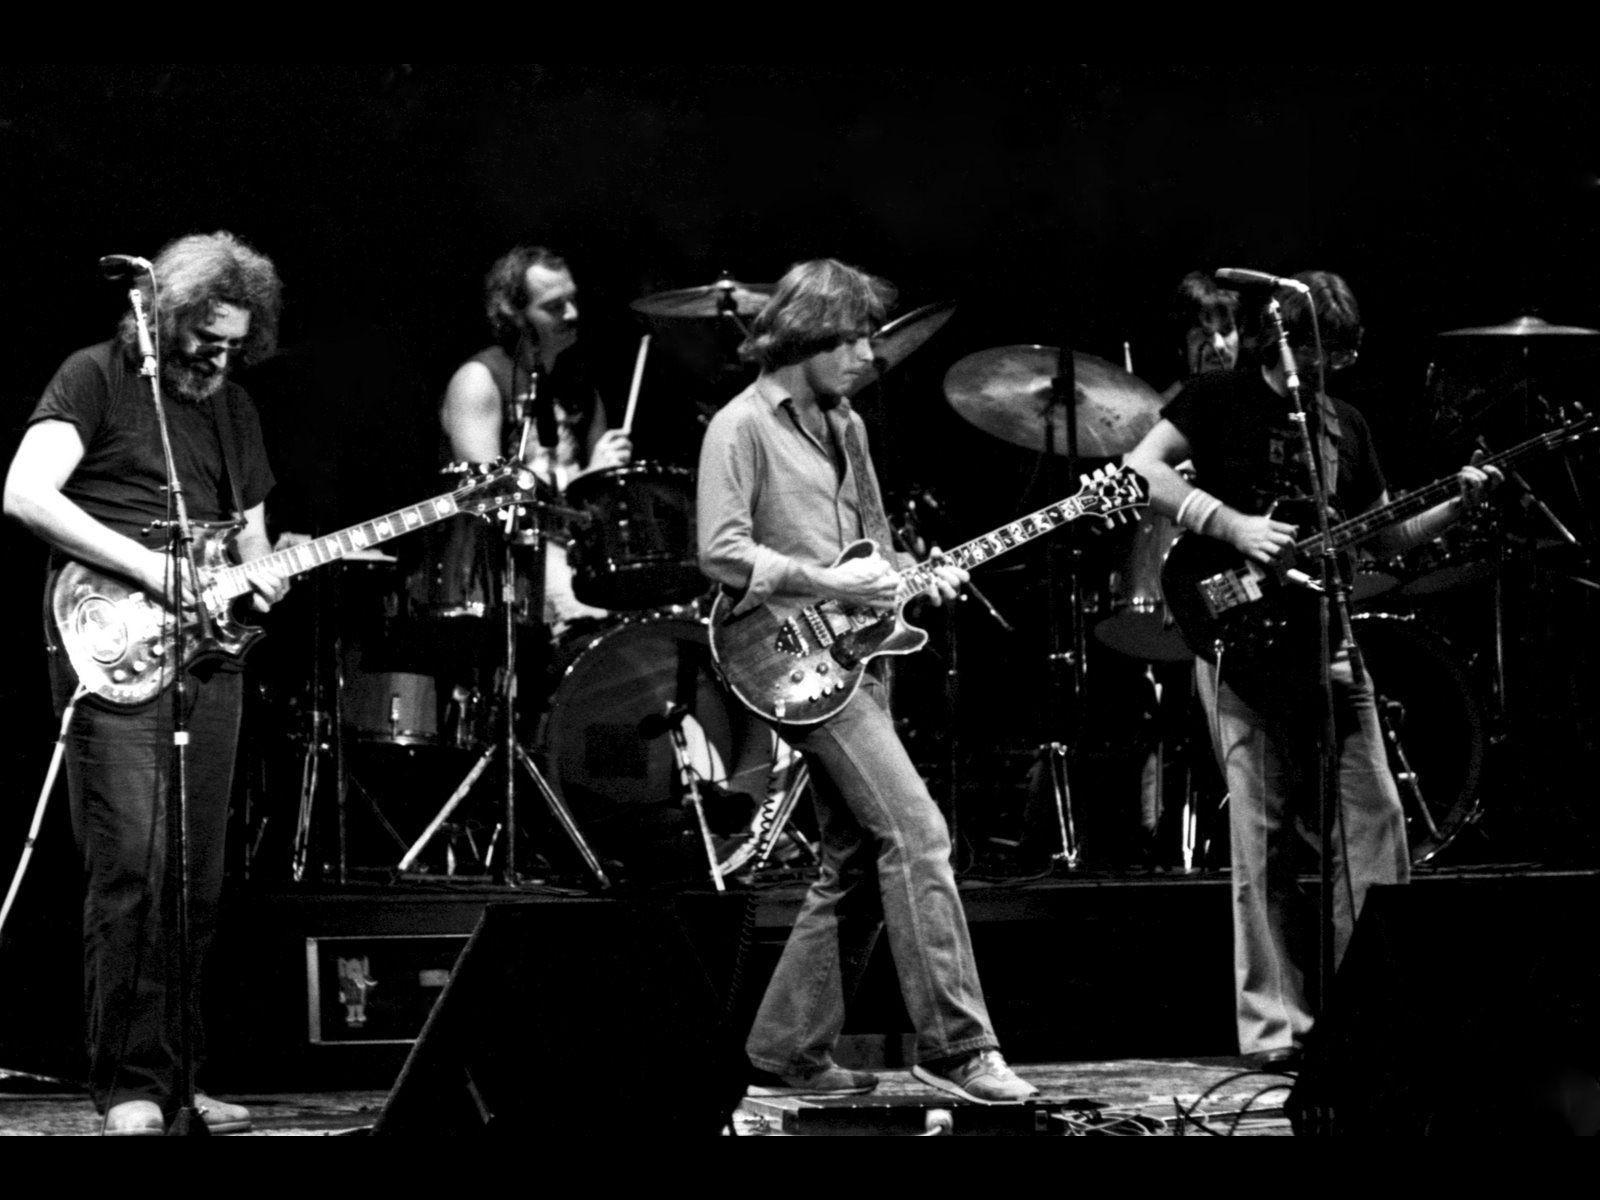 Grateful Dead Wallpapers Music Wallpapers 1600x1200PX ~ Wallpapers